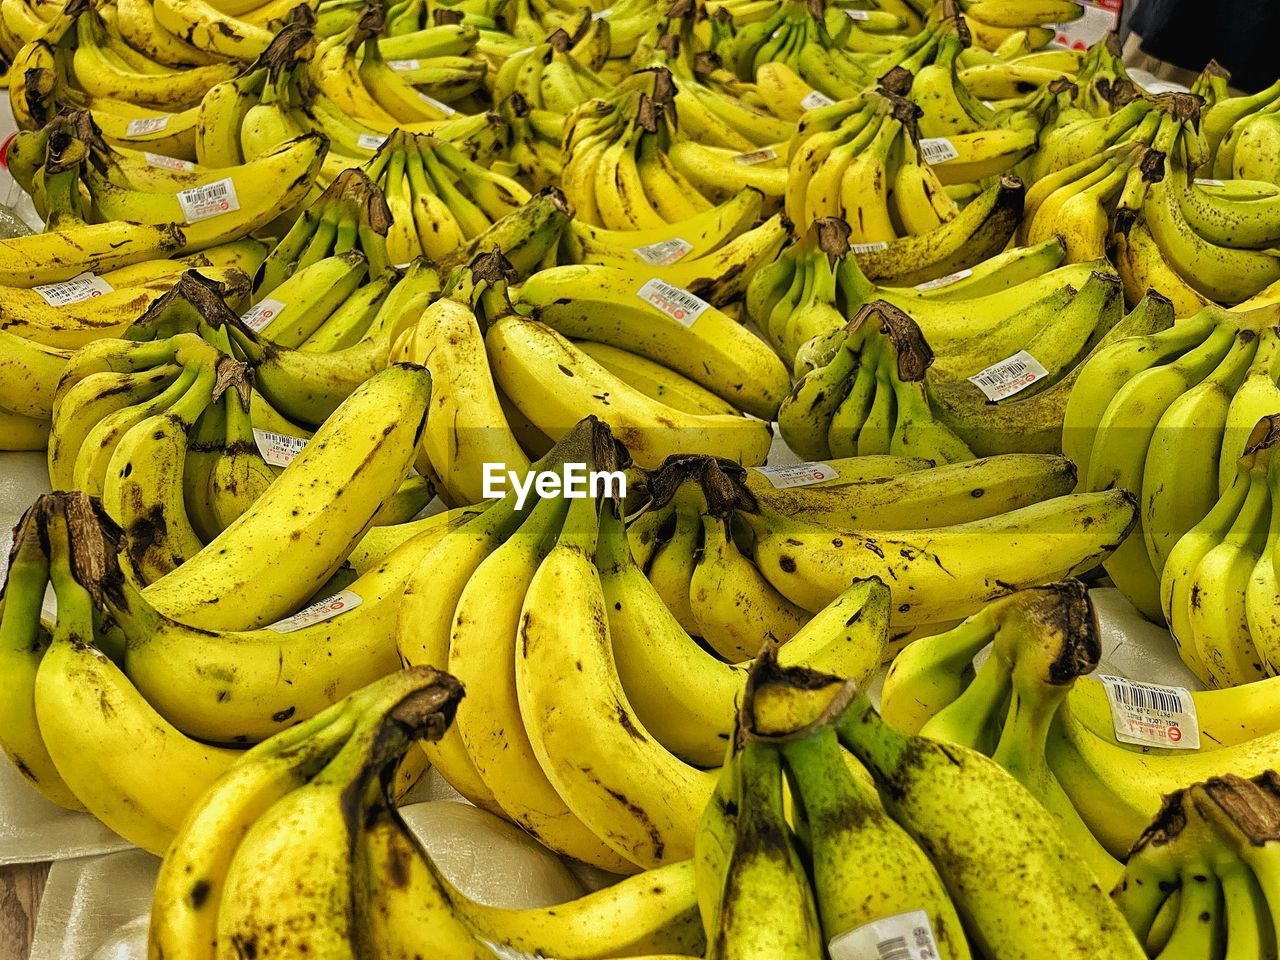 CLOSE-UP OF BANANAS FOR SALE IN MARKET